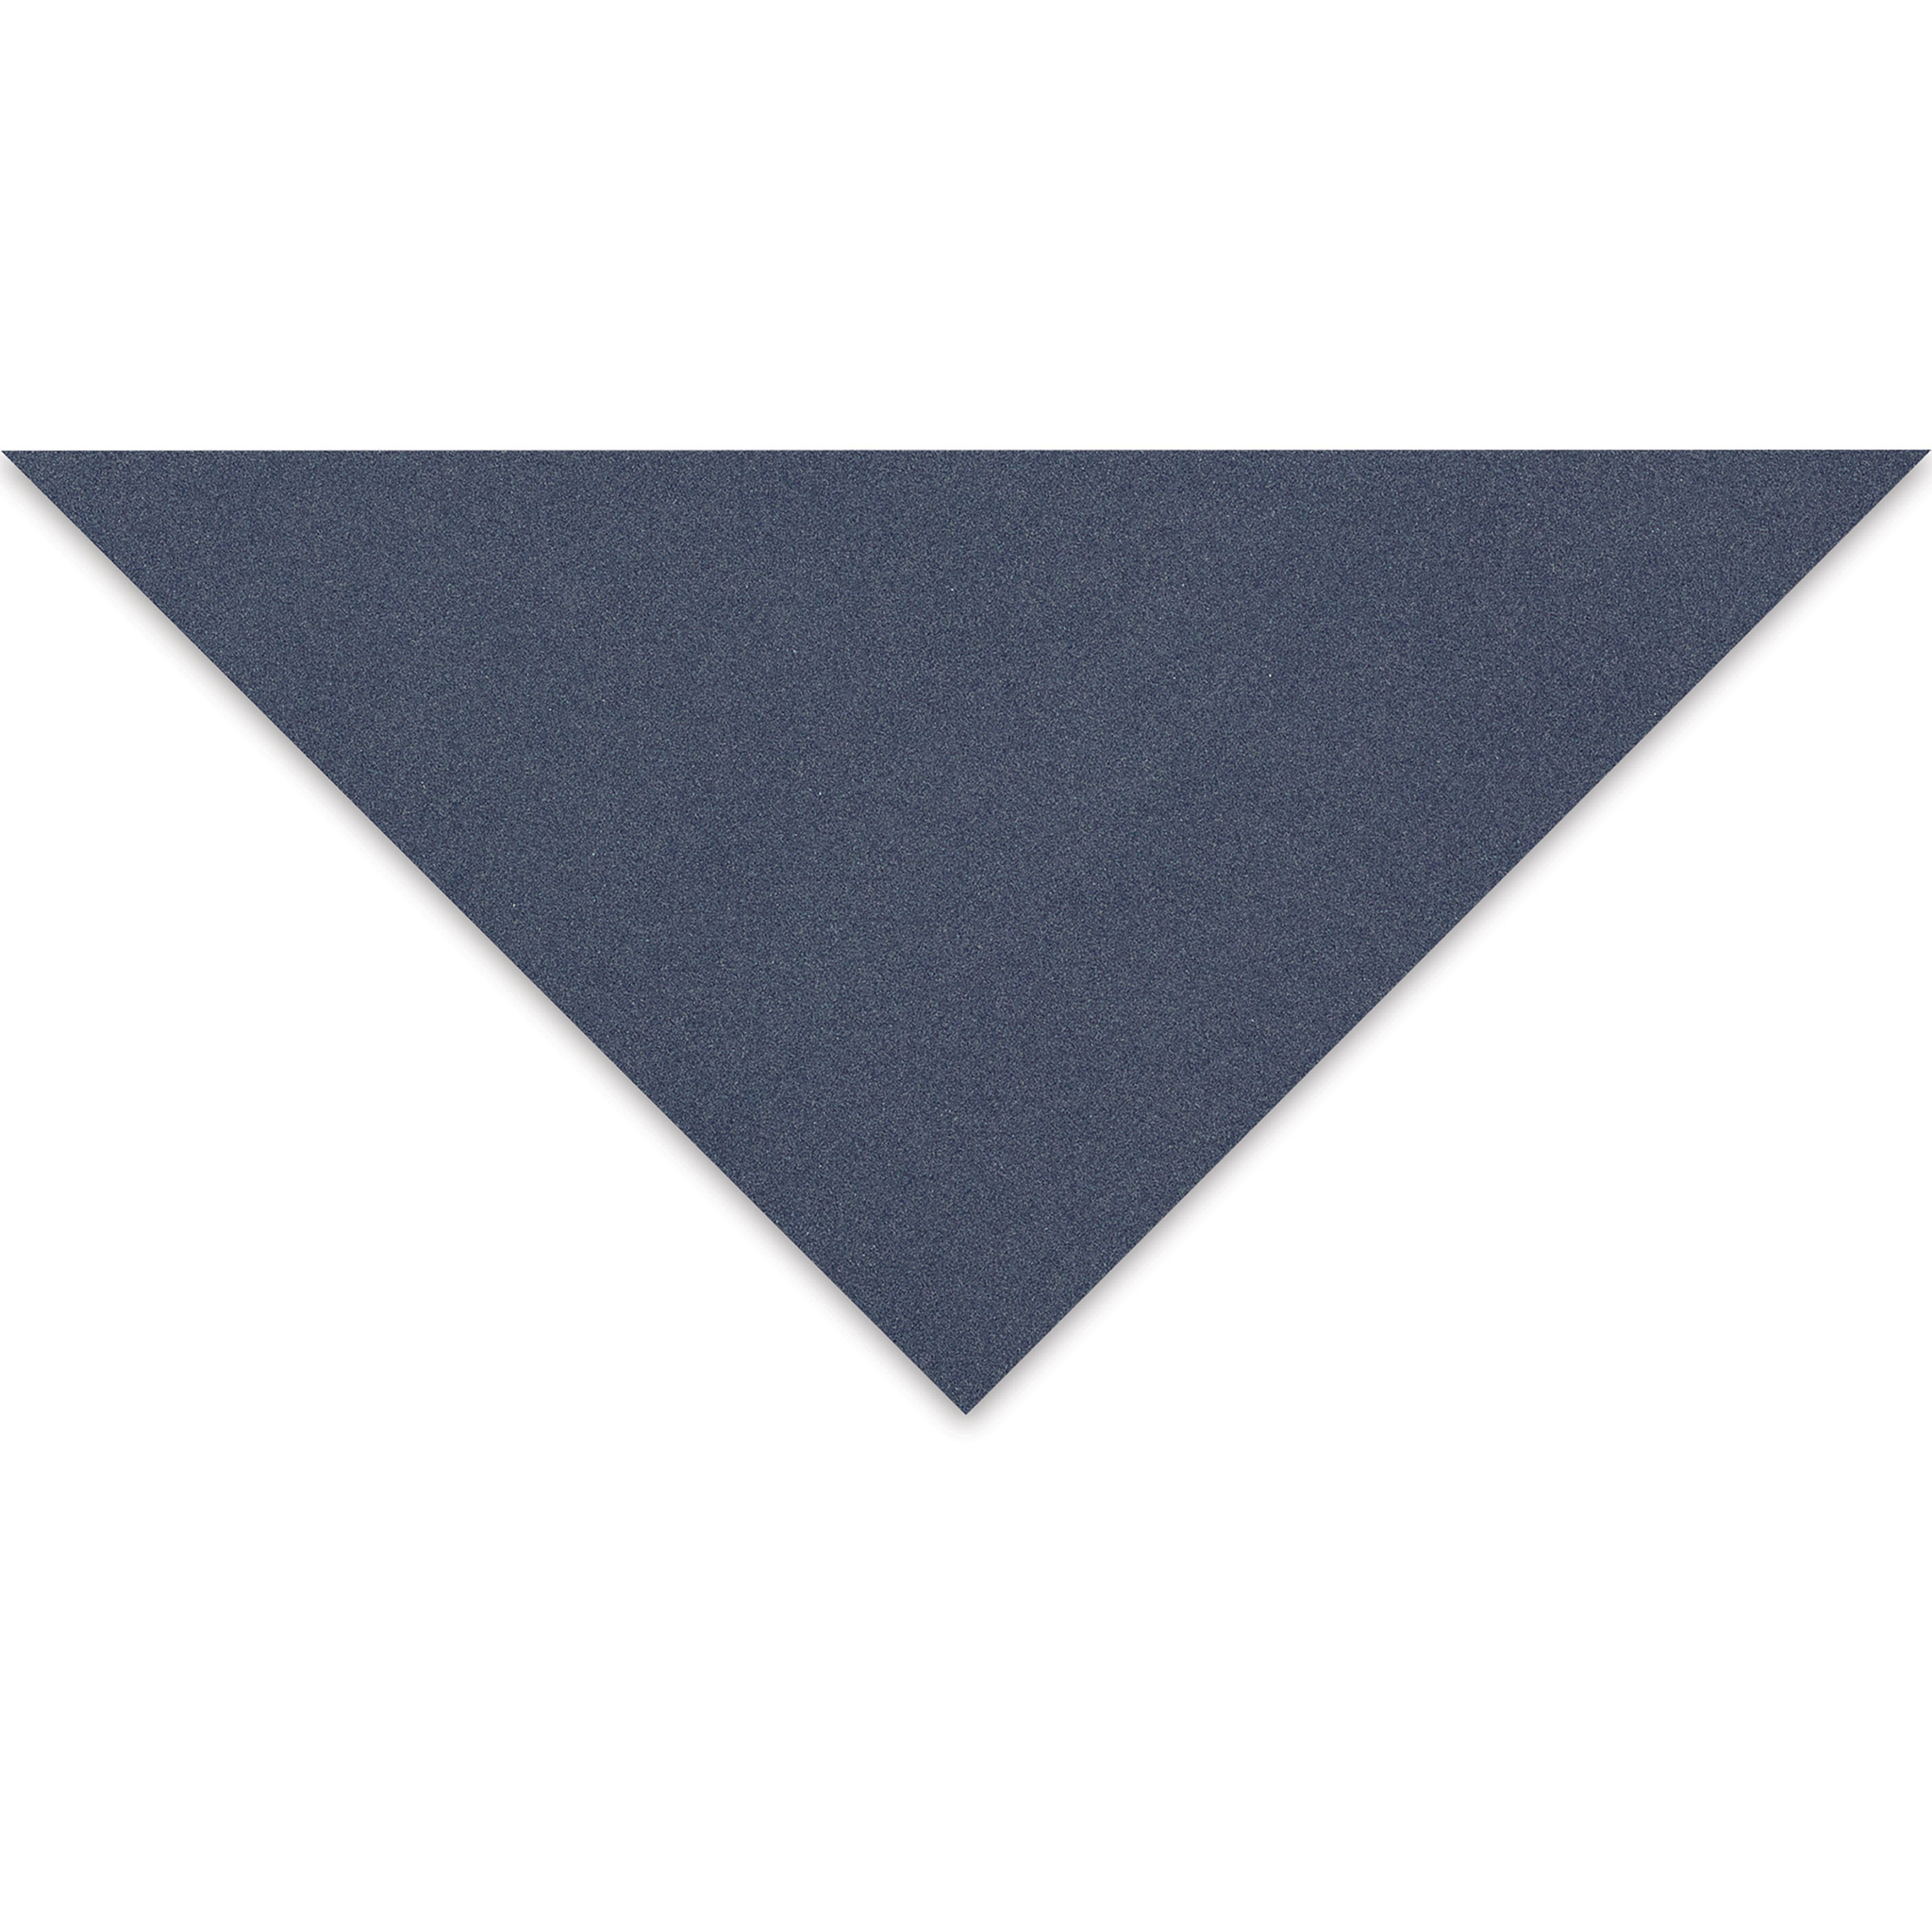 Exaclair B2B #296019 - Clairefontaine Pastelmat - Sheets - Dark Grey - Five  Sheets - 360g - 27 1/2 x 39 1/2